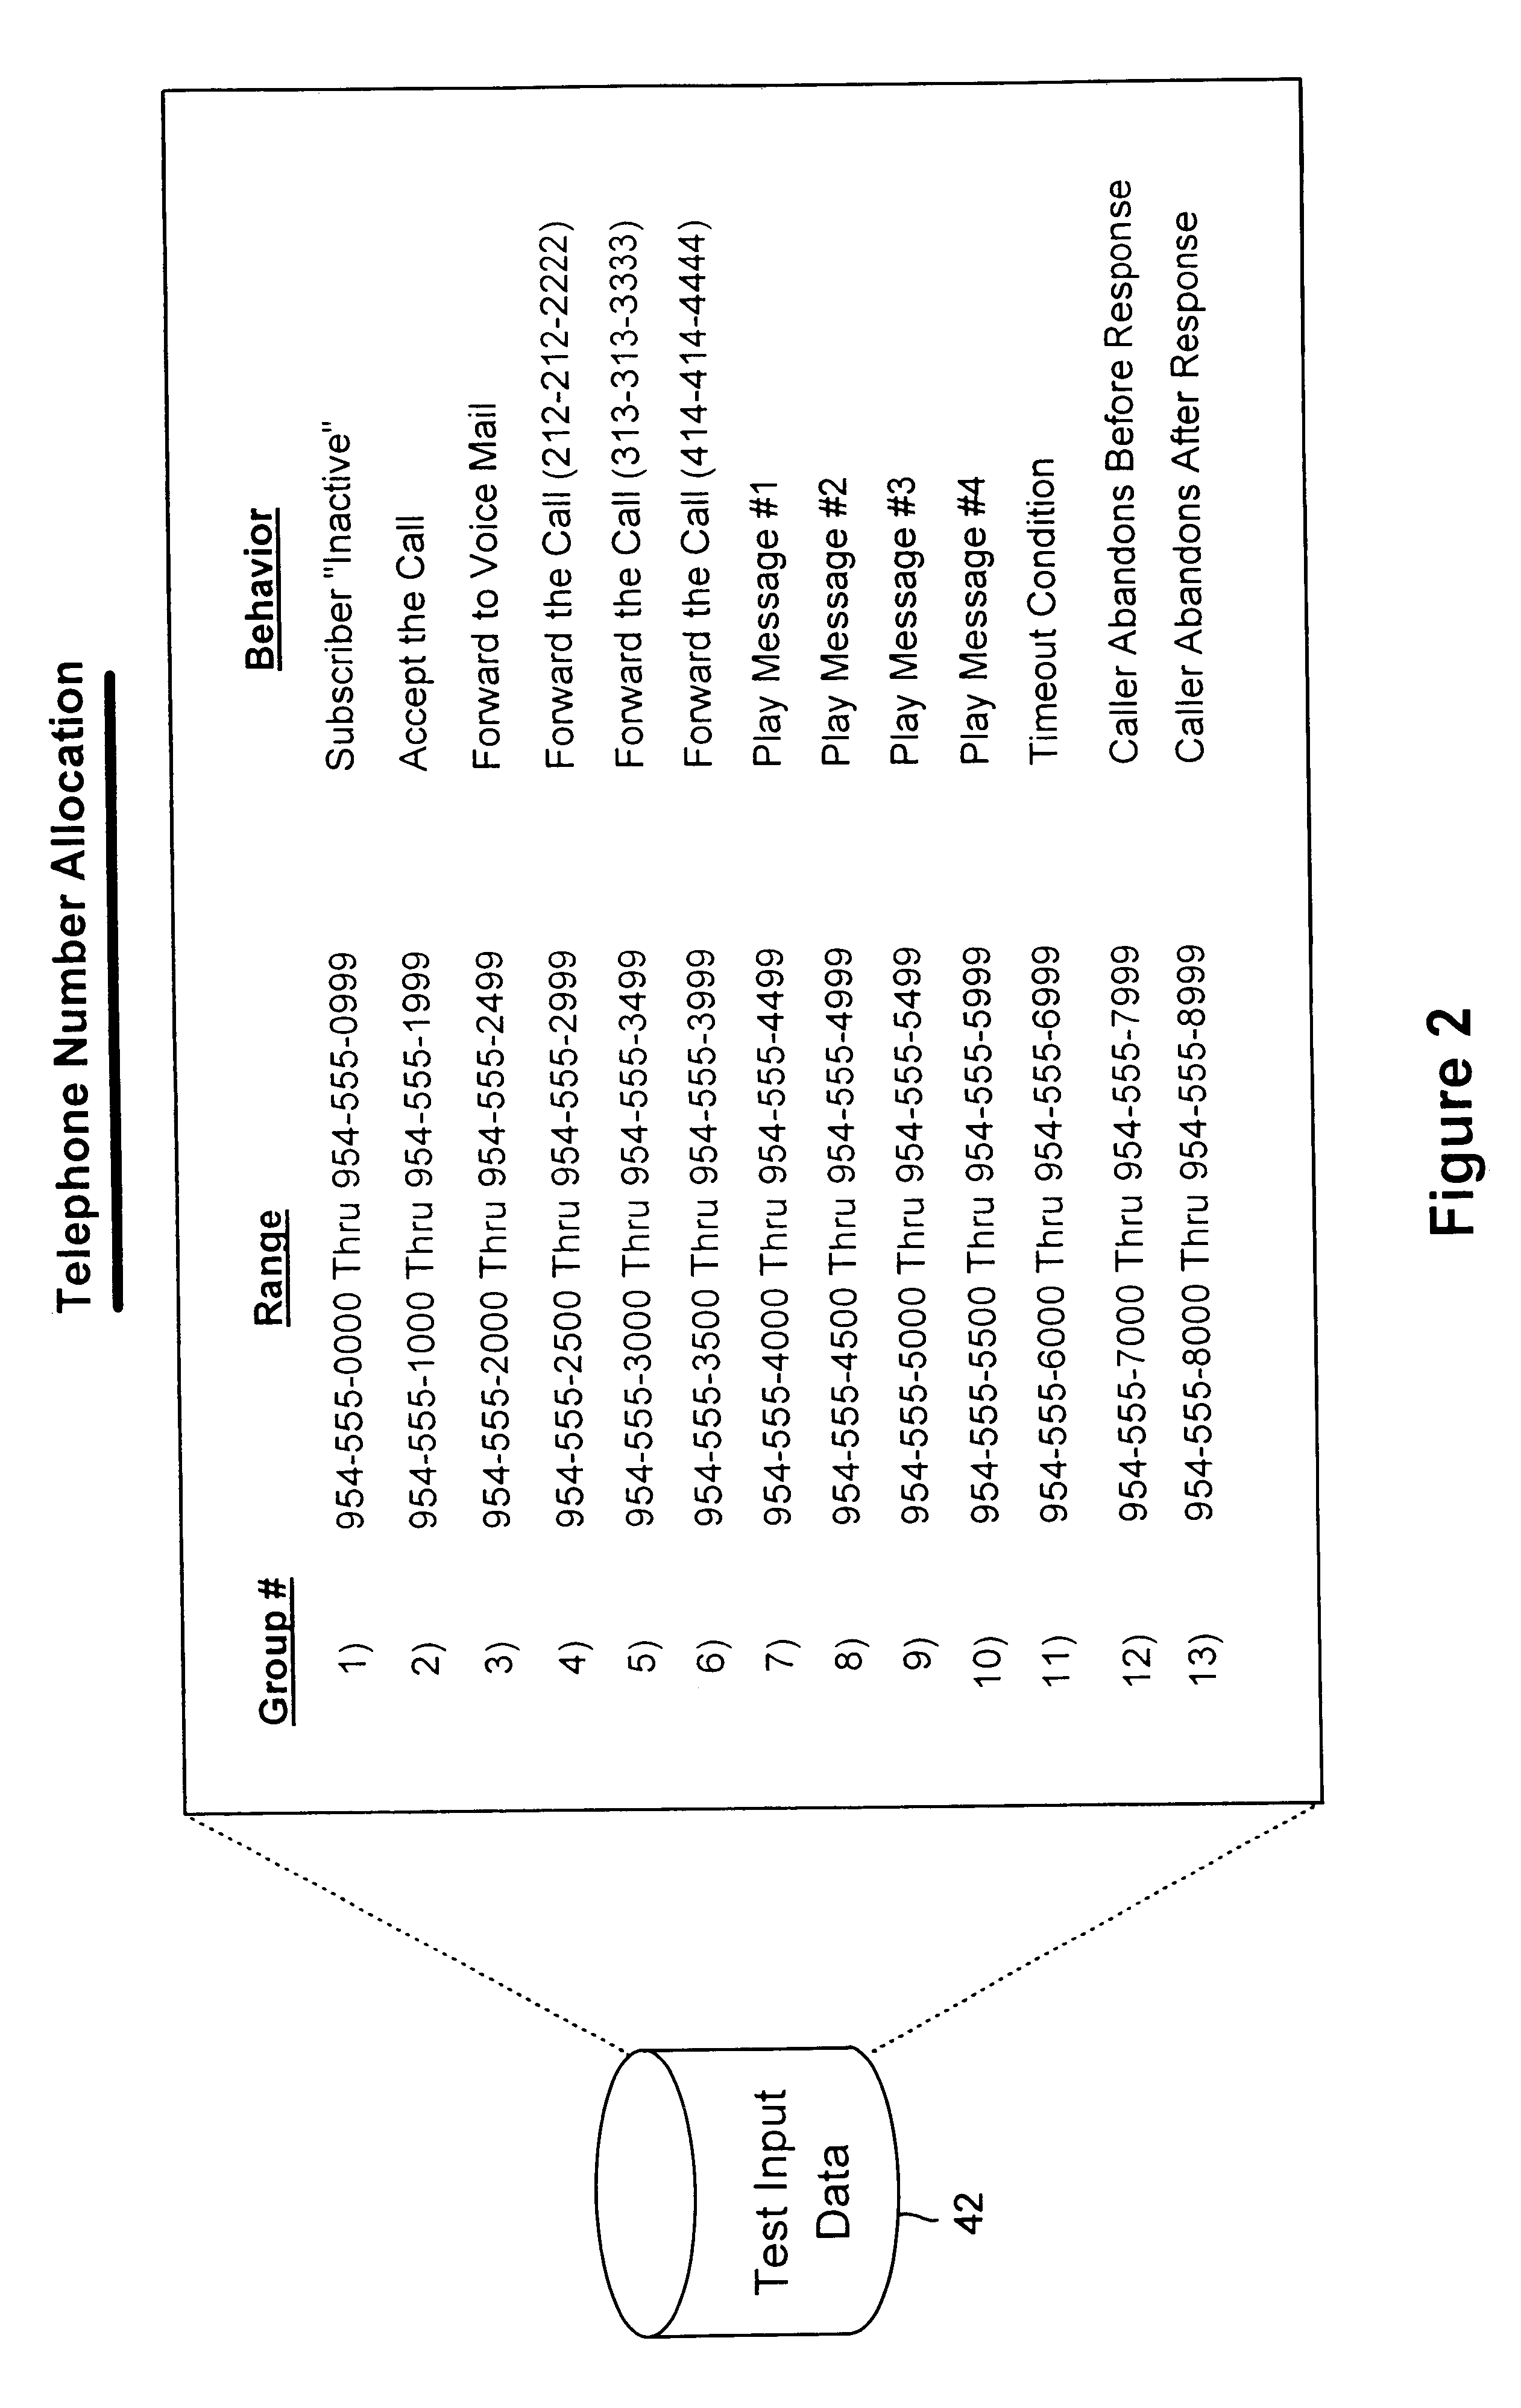 System and method of operation for verifying and validating public switch telephone networks (PSTN) to (IP) network services